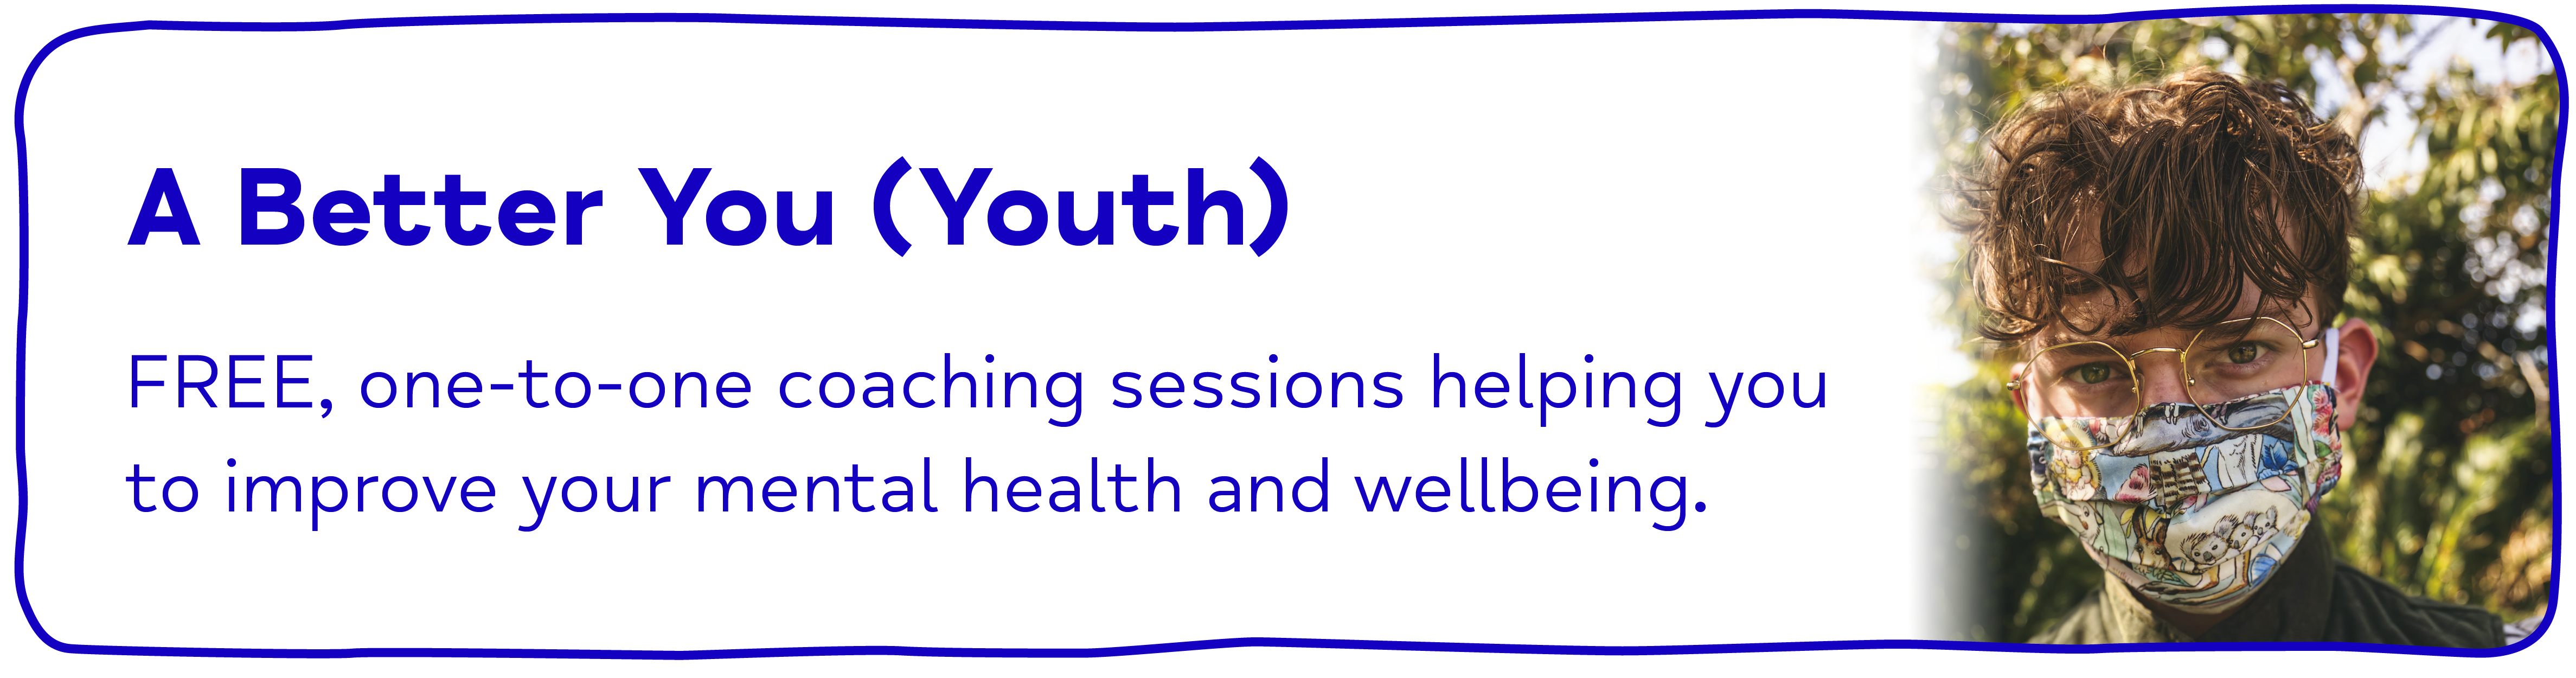 A Better You (Youth). FREE, one to one coaching sessions helping you to improve your mental health and wellbeing.